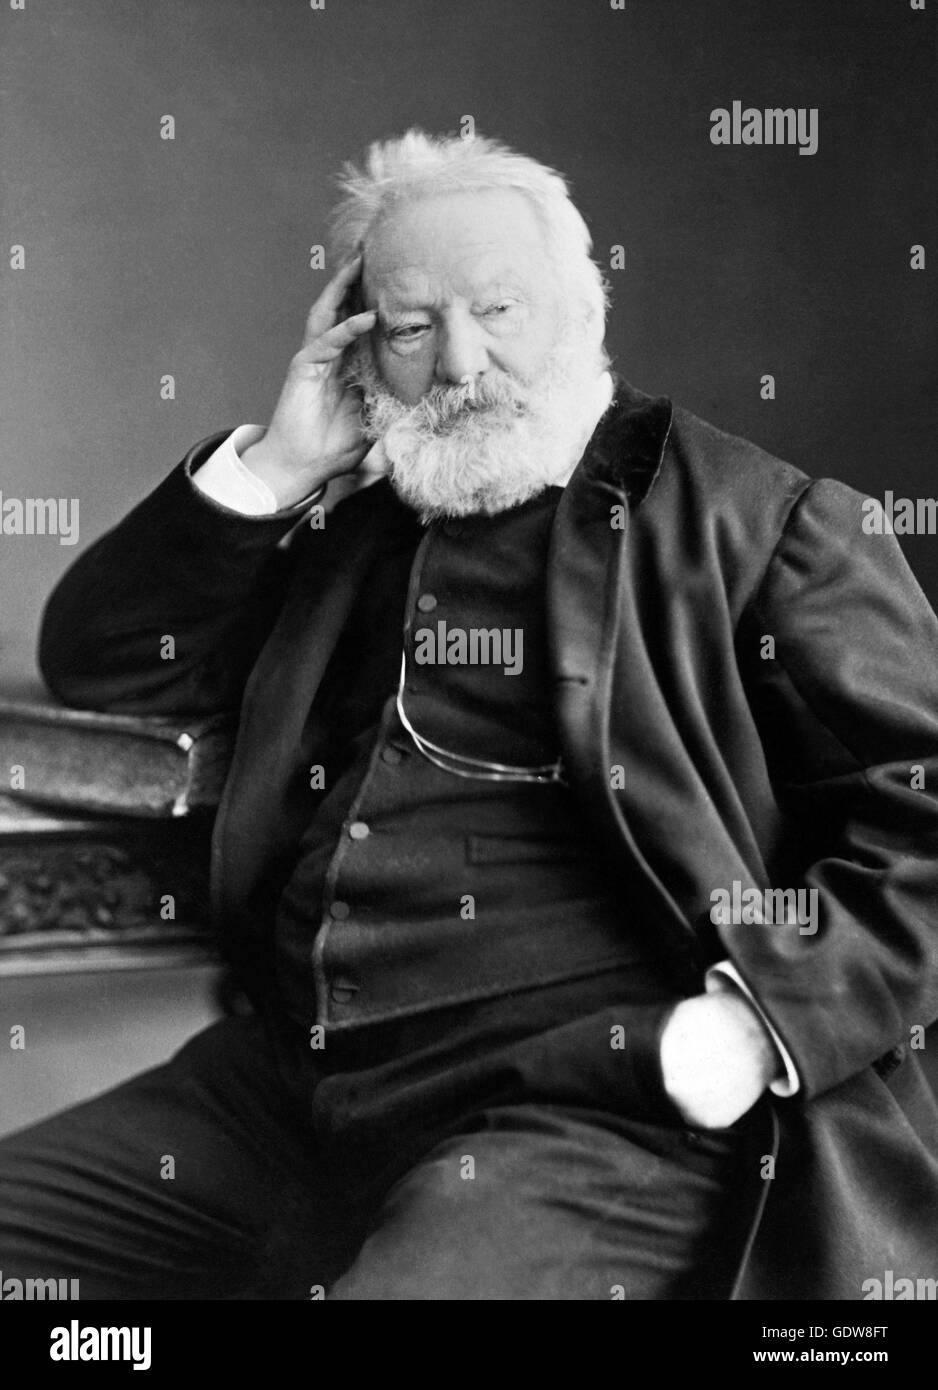 Victor Hugo. Portrait of the French writer, Victor Marie Hugo (1802-1885), by Nadar (Gaspard Félix Tournachon), c.1880. Stock Photo